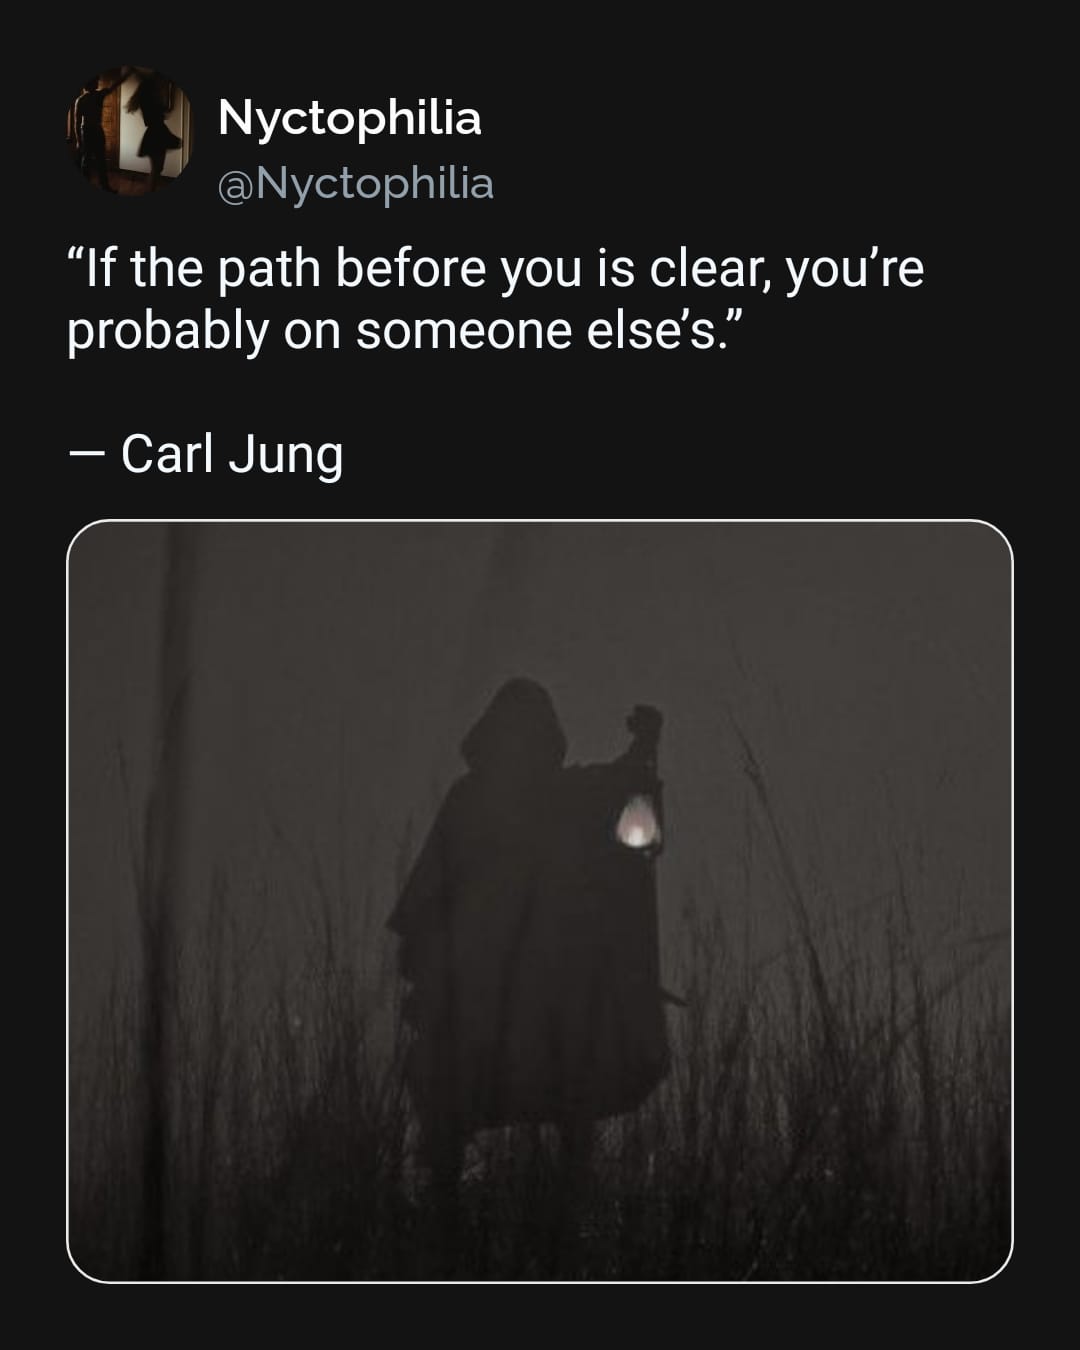 if the path before you is clear, you're probably on someone else's, carl jung